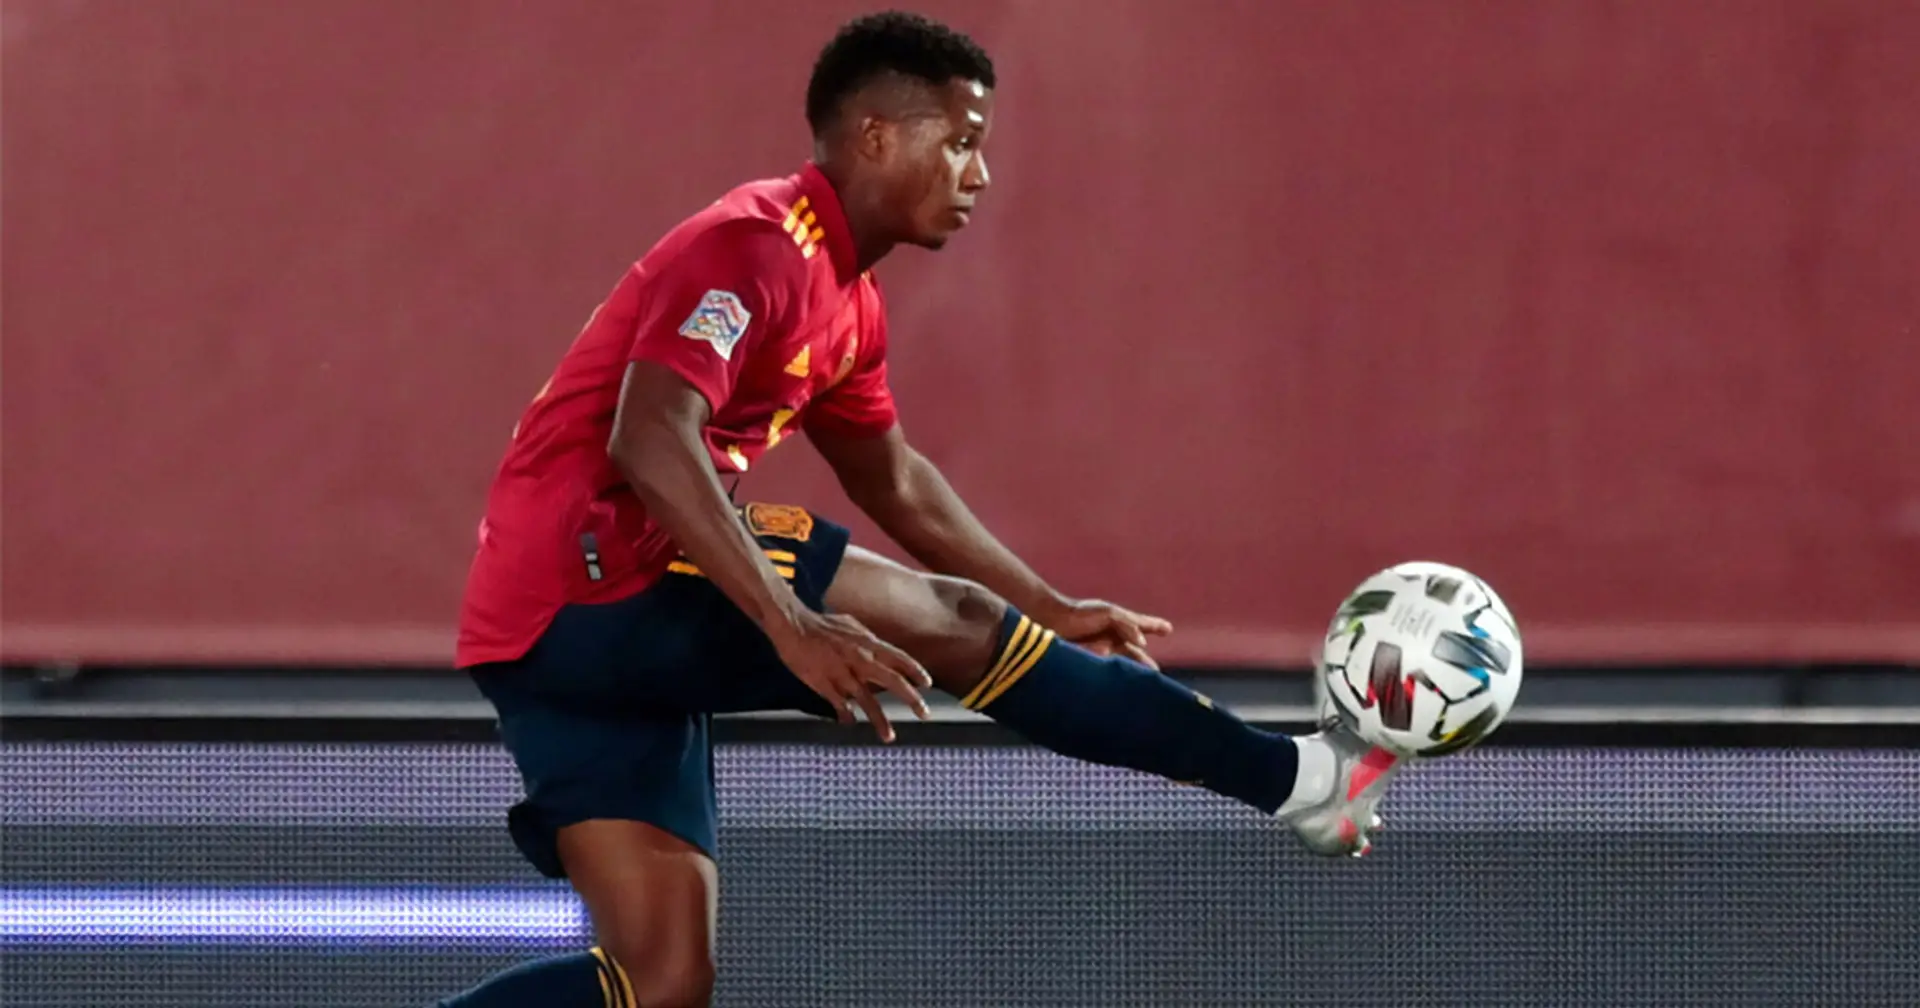 Ansu Fati breaks 95-year-old record becoming Spain's youngest ever goalscorer